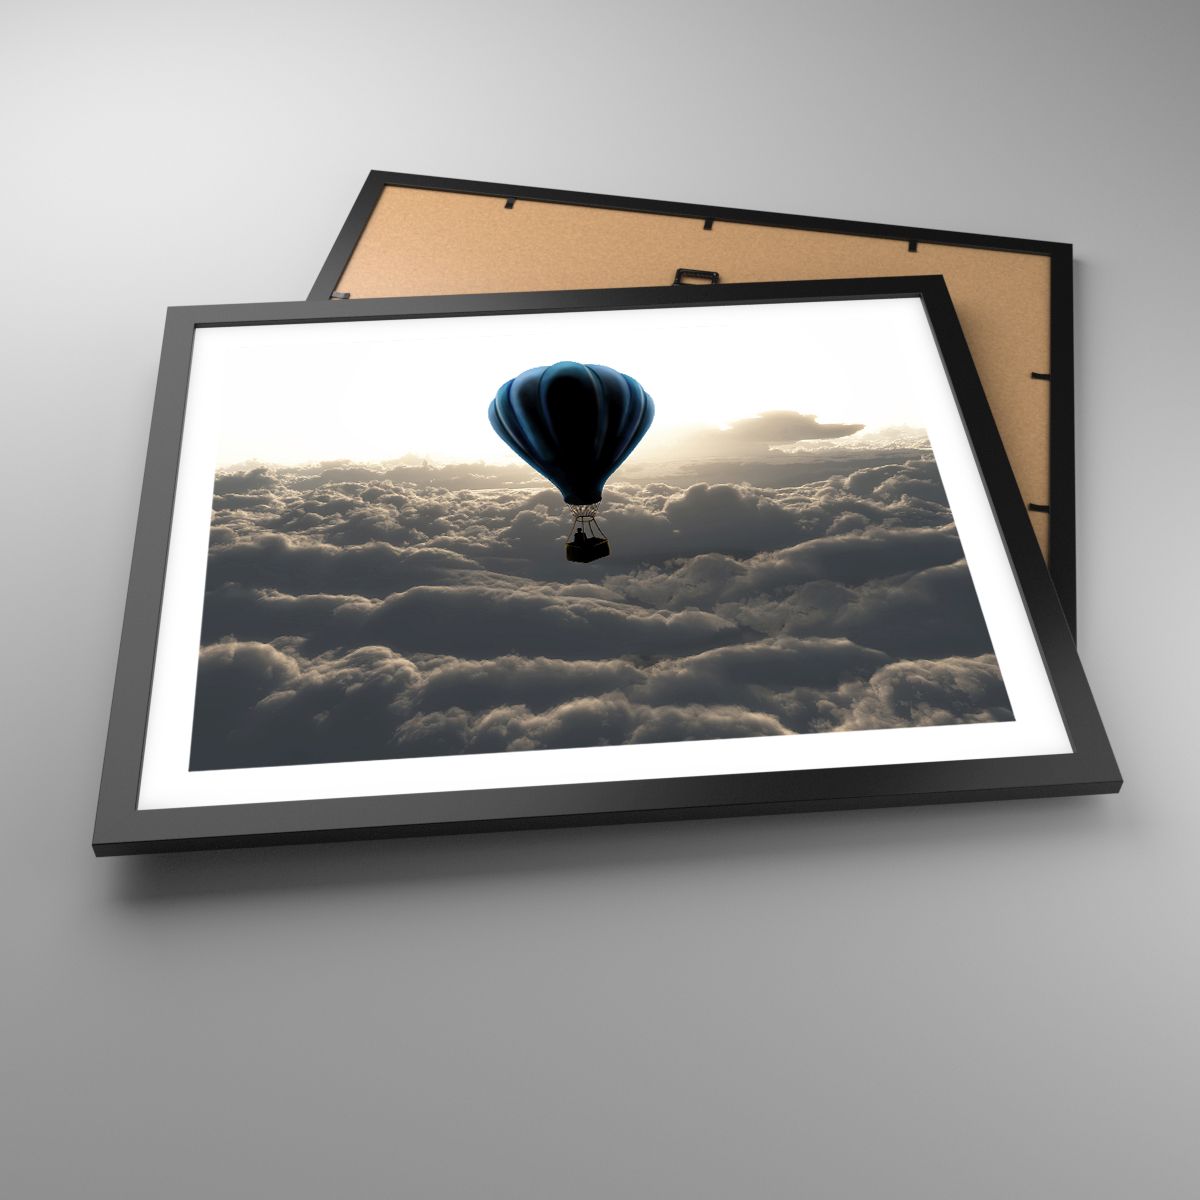 Poster Landscape, Poster Balloon Flight, Poster Travels, Poster Clouds, Poster Adventure